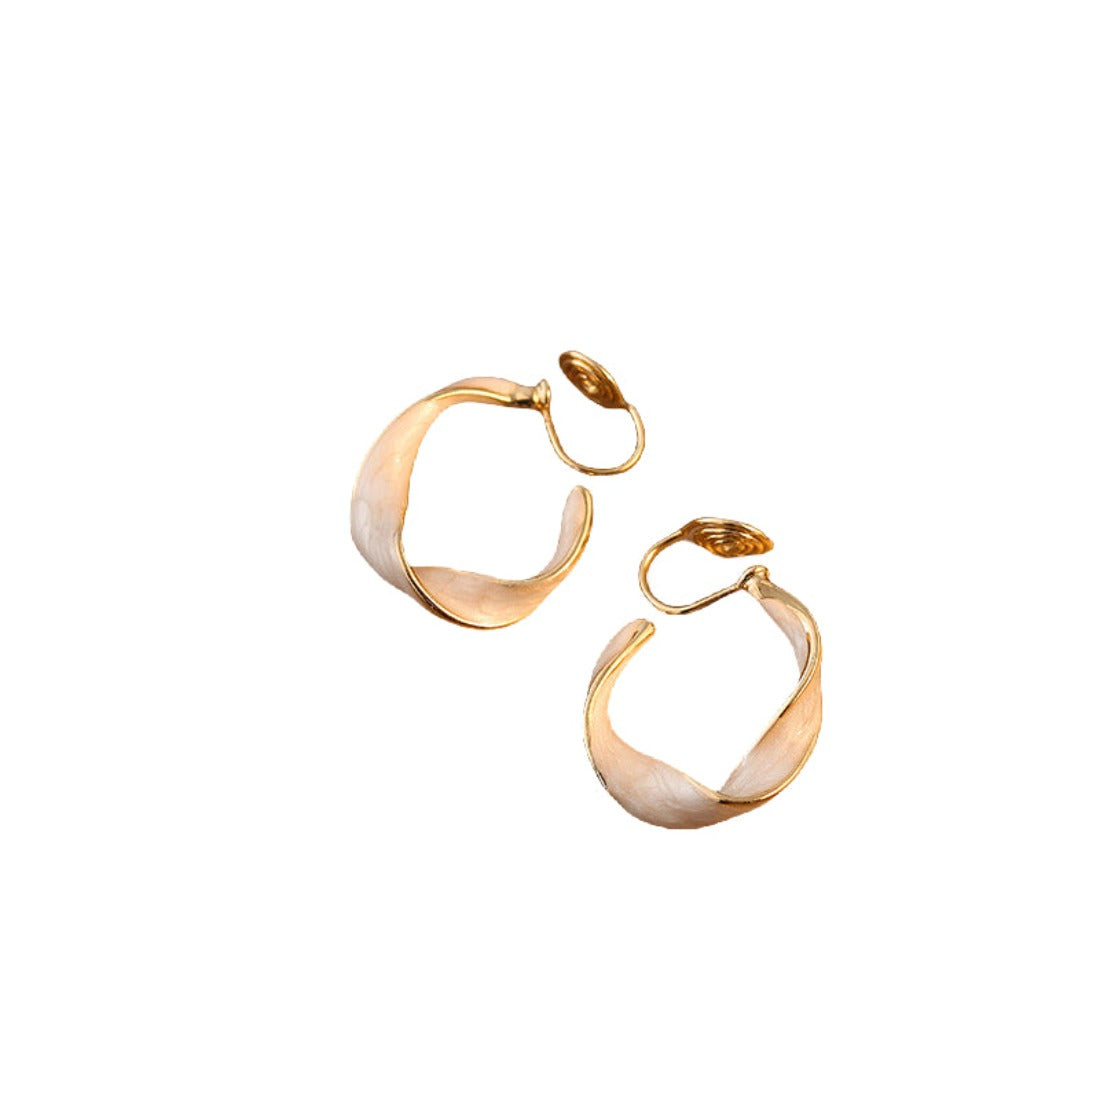 Vintage High-end Style Clip-on Earrings, Ear Cuffs For Women